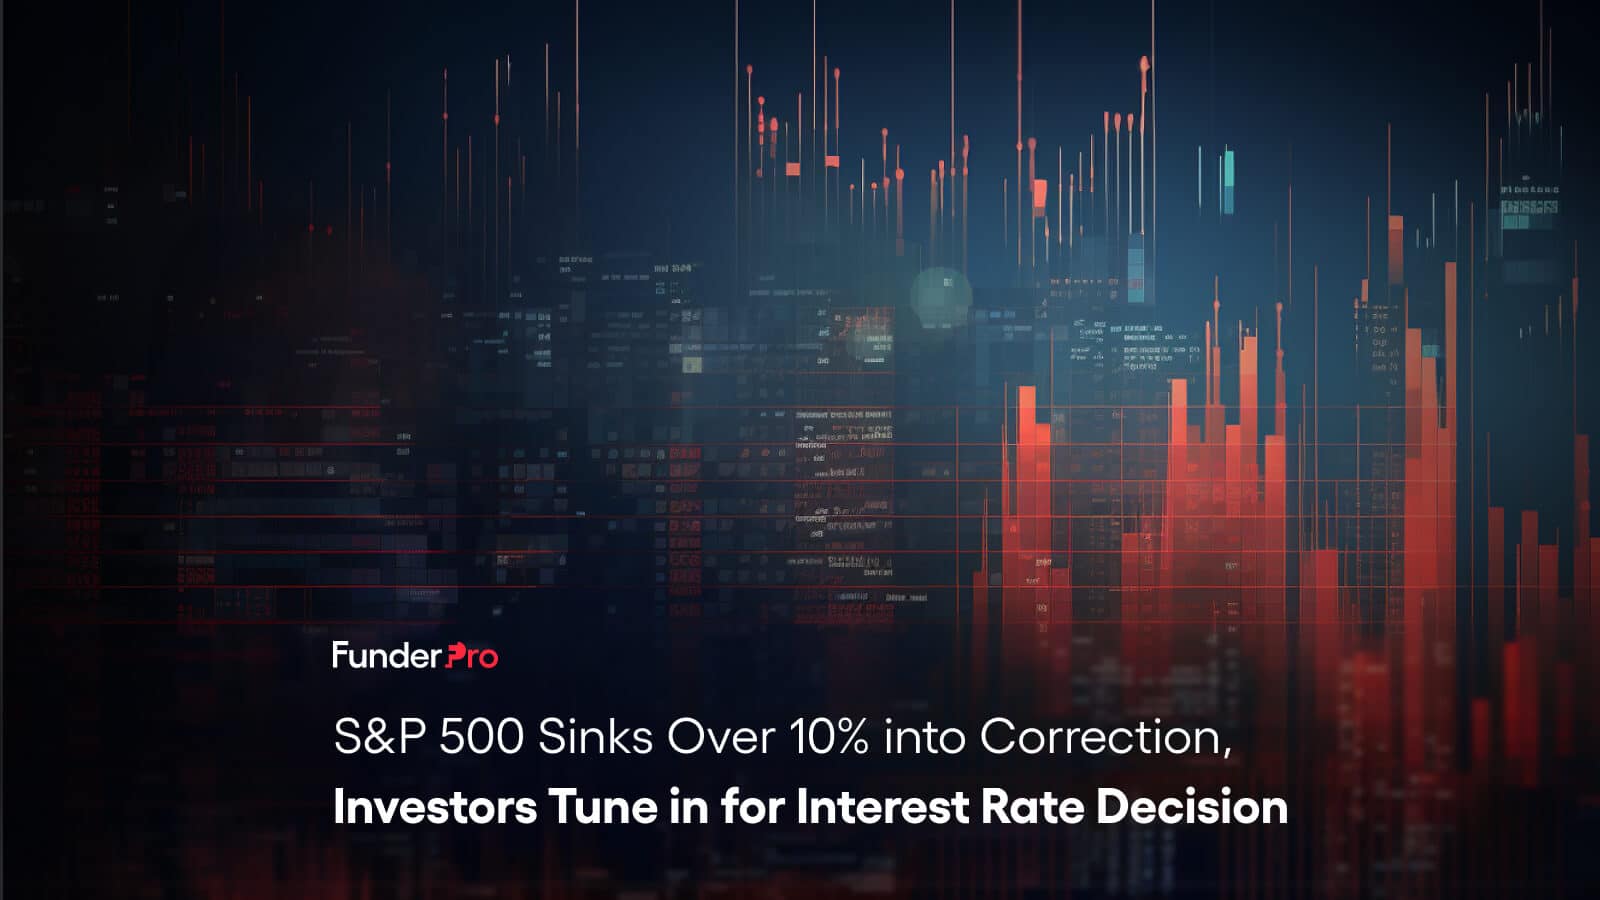 S&P 500 Sinks Over 10% into Correction, Investors Tune in for Interest Rate Decision